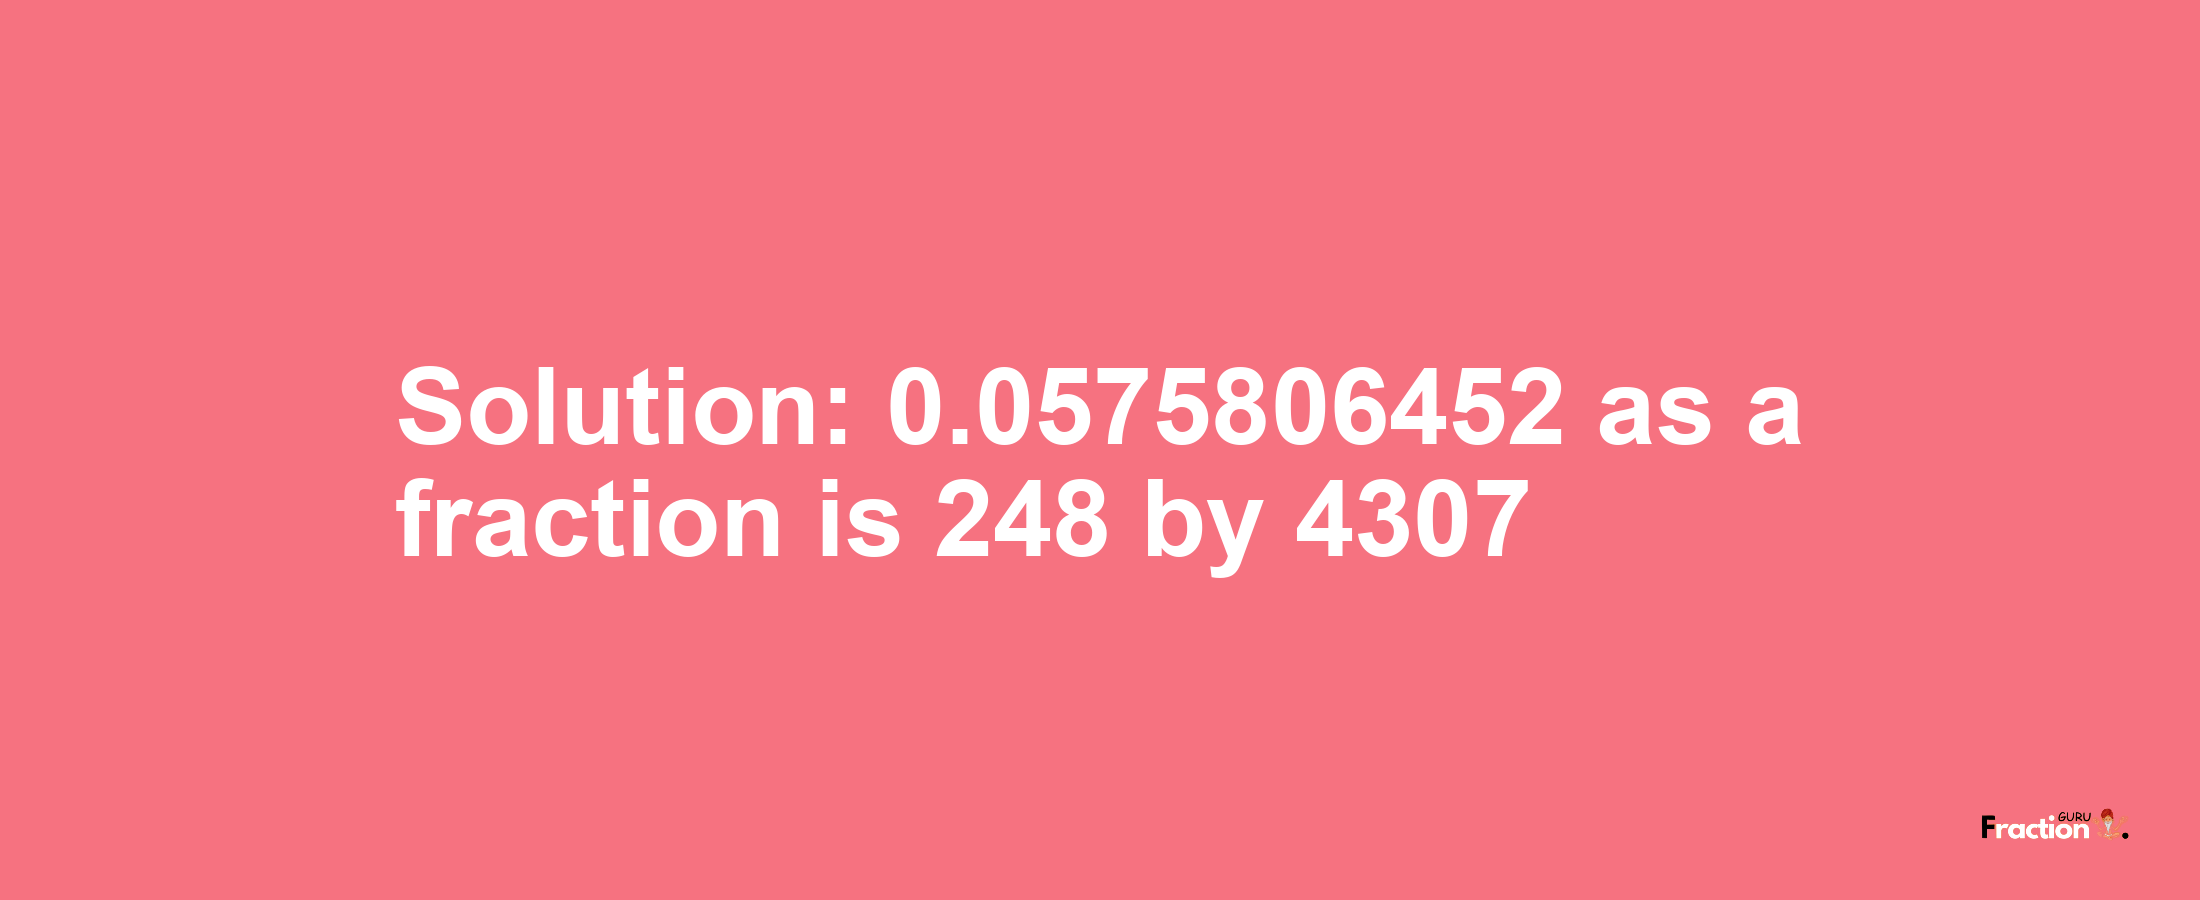 Solution:0.0575806452 as a fraction is 248/4307